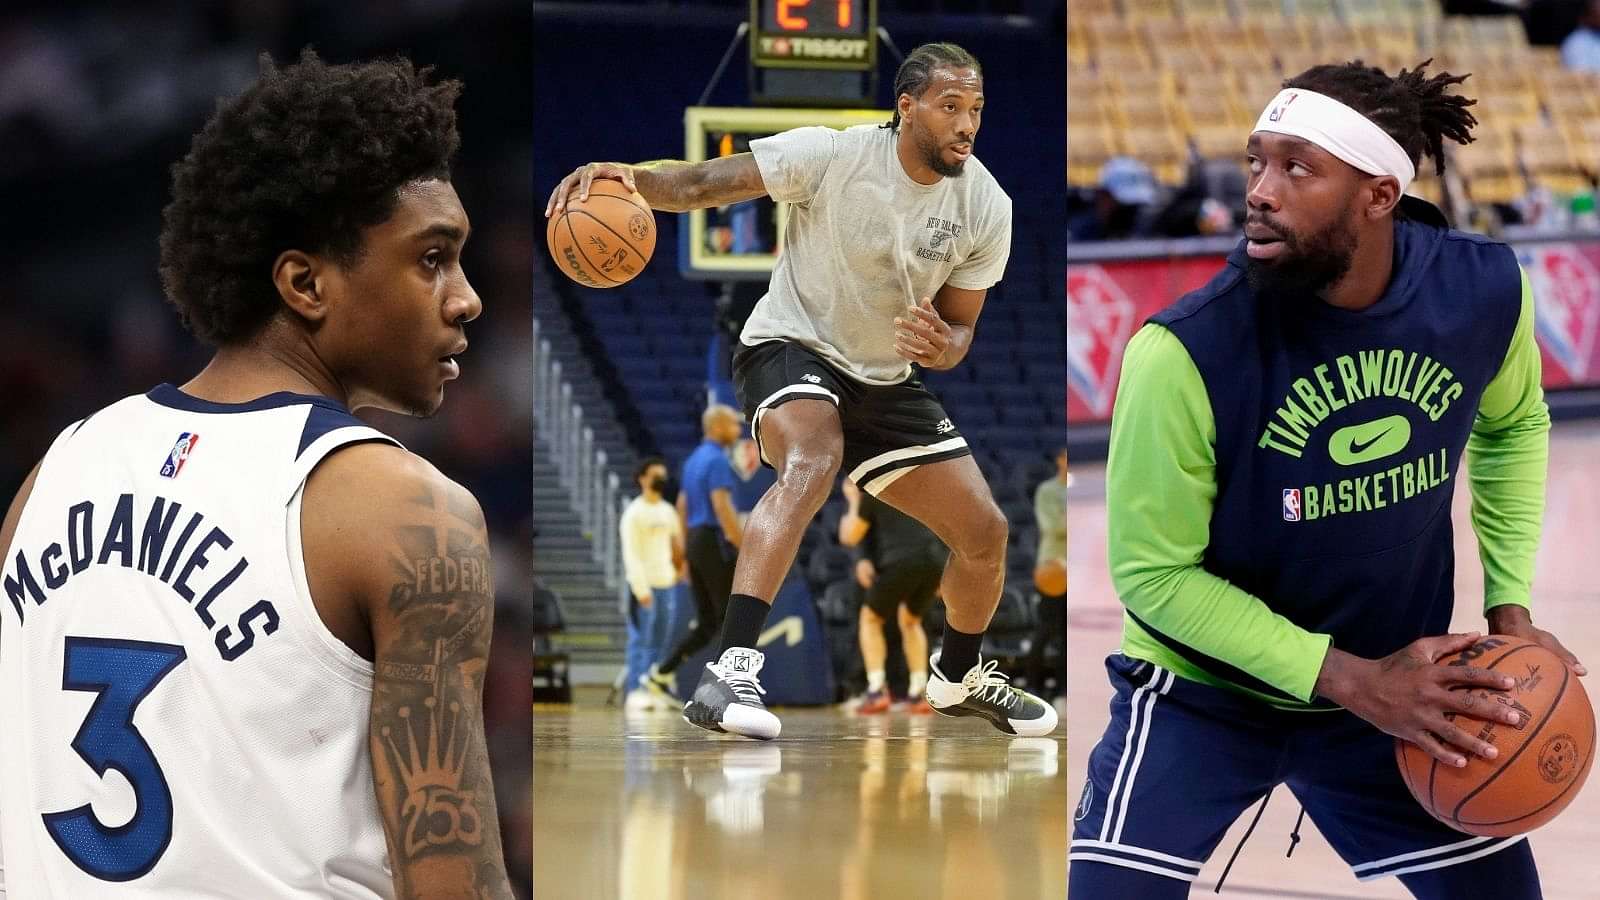 1 and #2 picks Paolo Banchero and Chet Holmgren get outscored by  Timberwolves forward Jaden McDaniels in Jamal Crawford's CrawsOver League -  The SportsRush